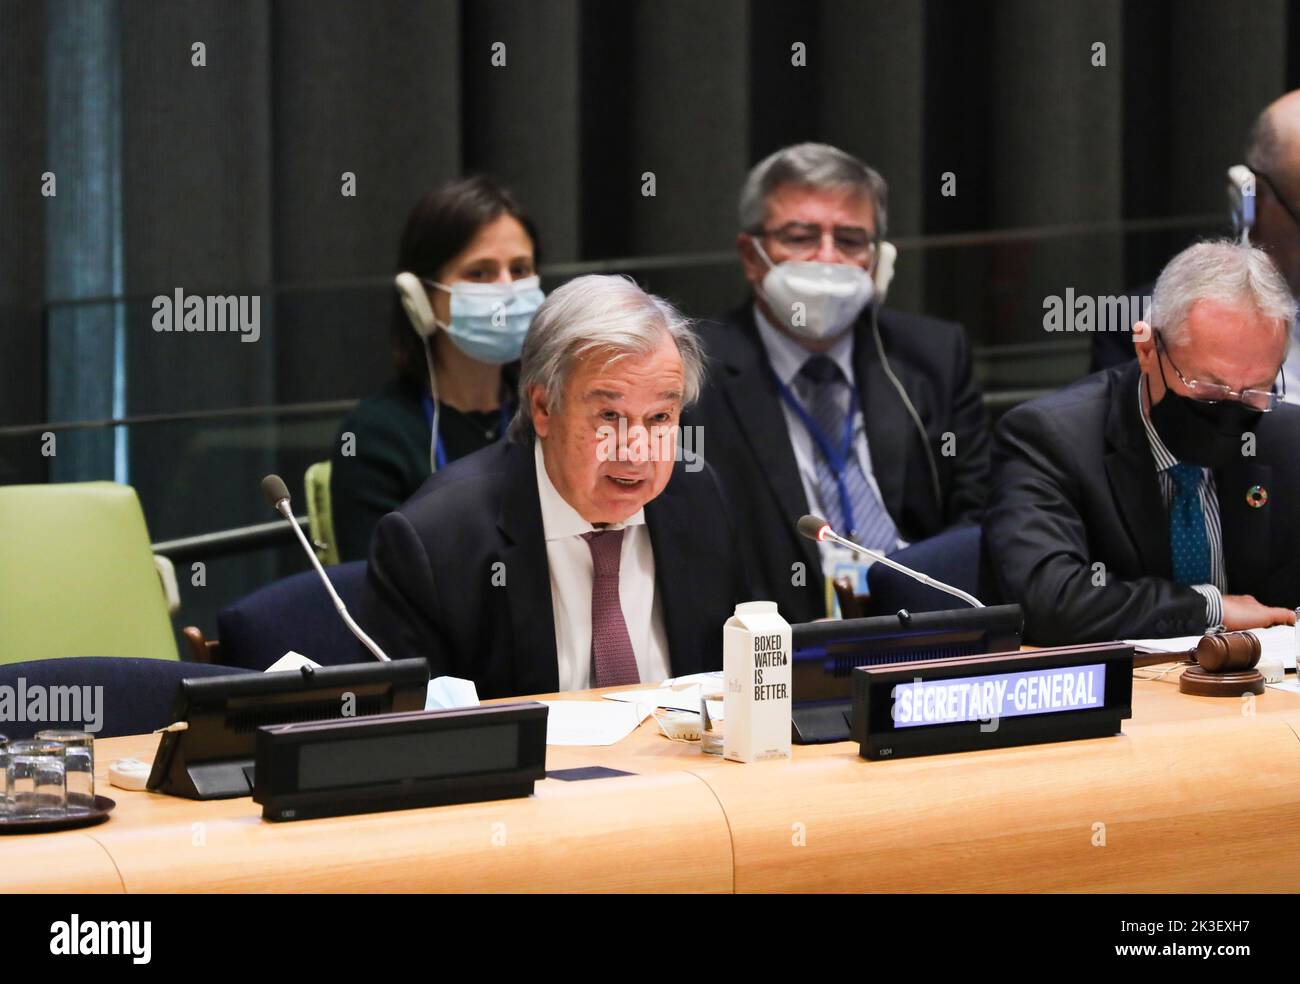 United Nations, Front) speaks at a UN General Assembly high-level meeting to commemorate and promote the International Day for the Total Elimination of Nuclear Weapons at the UN headquarters in New York. 26th Sep, 2022. UN Secretary-General Antonio Guterres (L, Front) speaks at a UN General Assembly high-level meeting to commemorate and promote the International Day for the Total Elimination of Nuclear Weapons at the UN headquarters in New York, on Sept. 26, 2022. Guterres on Monday called for the use of every means to eliminate the nuclear threat. Credit: Wang Ying/Xinhua/Alamy Live News Stock Photo